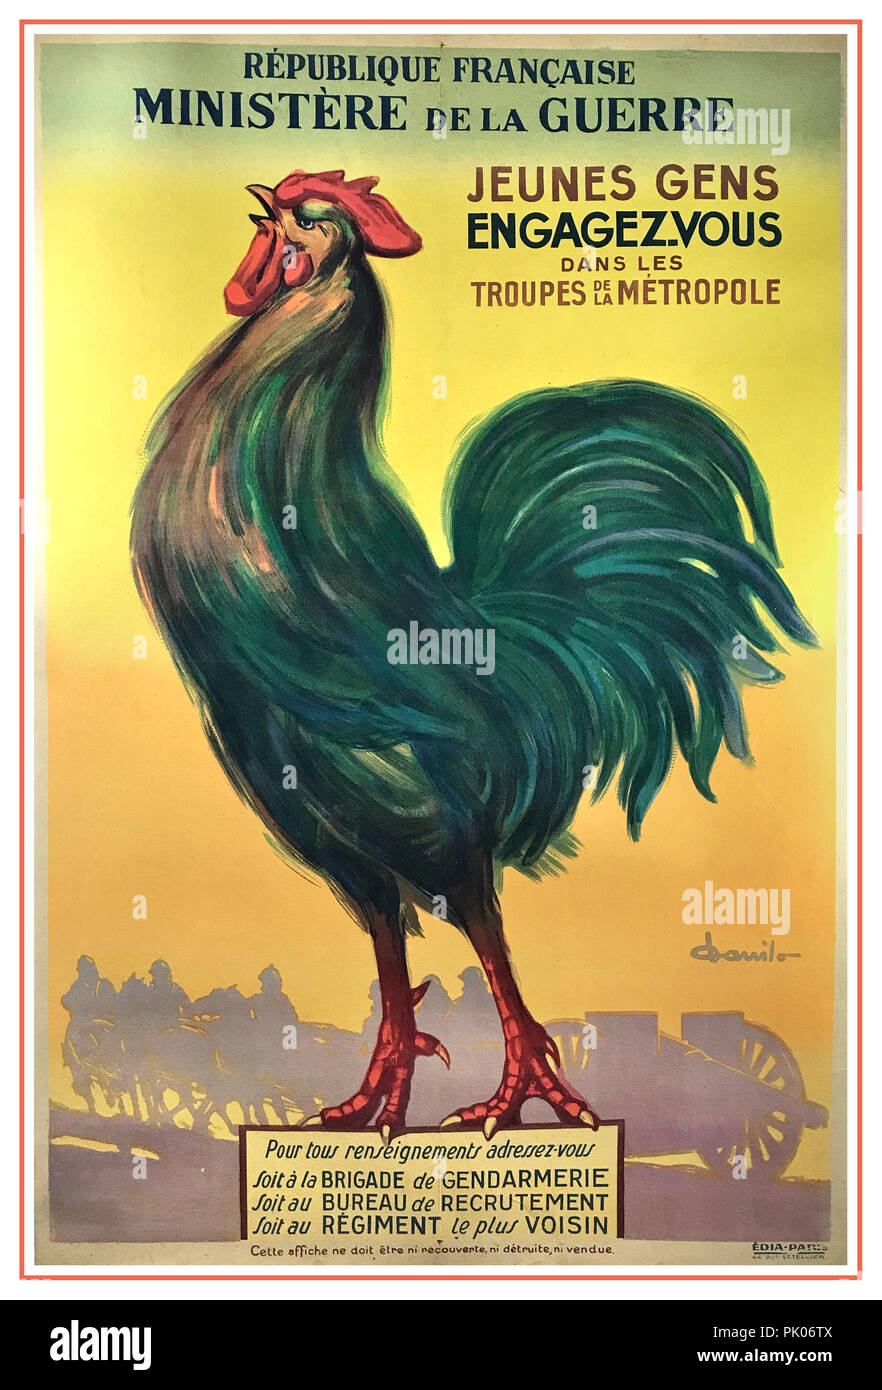 WORLD WAR 1  Vintage French Propaganda Recruitment Poster JEUNES GENS ENGAGEZ VOUS DANS LES TROUPES METROPOLE, 1914. Original WW1 French recruitment poster designed by Danilo during World War 1 to encourage young people to enlist in the Metropolitan Forces. Printed by the Republic of France Ministry of War this poster depicts the Gallic Rooster which symbolizes the nation of France and is often seen on French postage stamps.  The traditional symbolic rooster is front of the design set against a background of French troops on horseback hauling artillery on the WW1 battlefield. Stock Photo